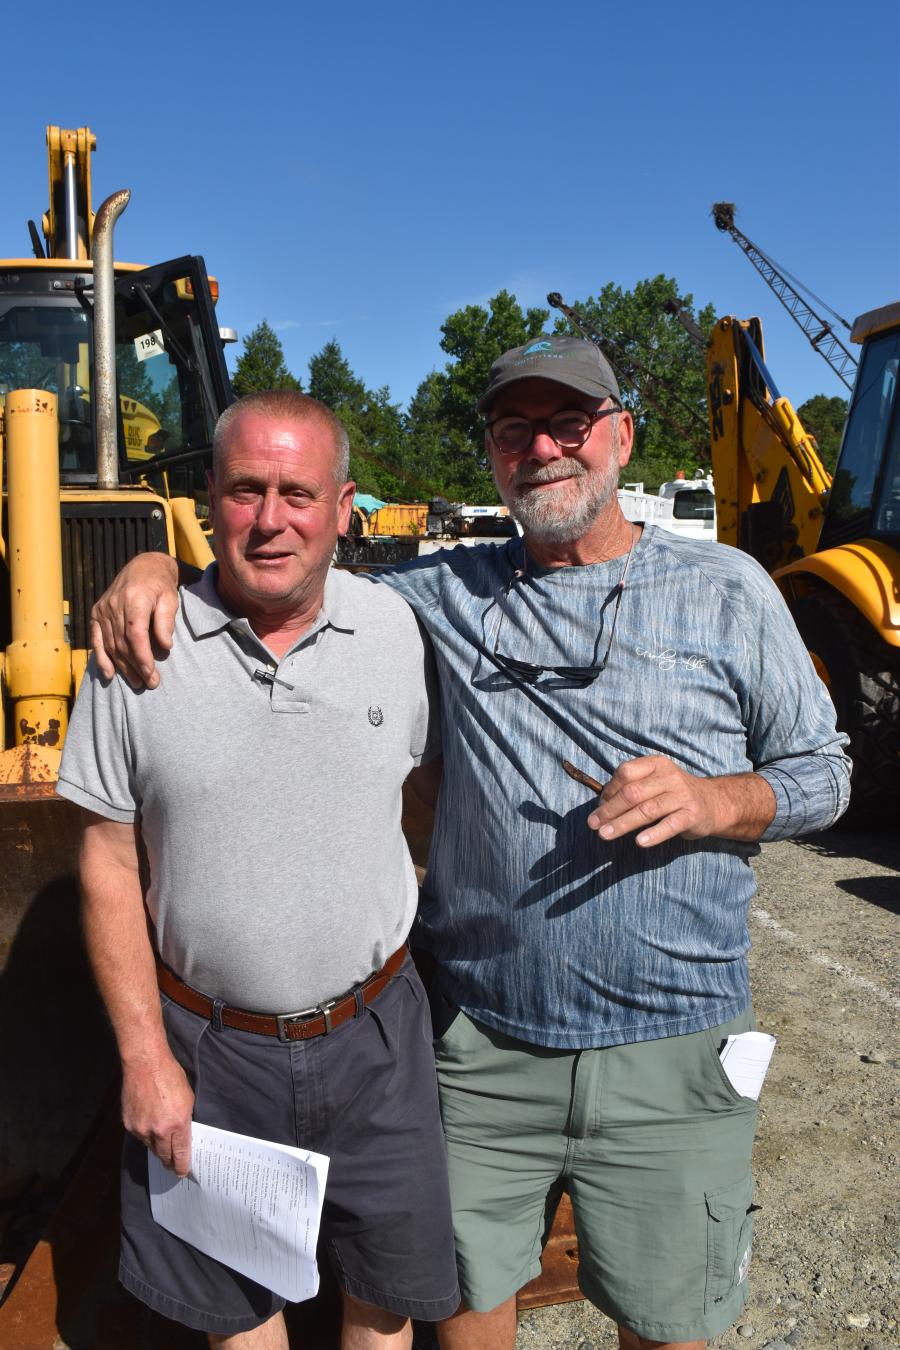 Mike Connor (L) of ABC Automotive in Willimantic, Conn., and Howard Hagget of Plainfield, Conn., exchange a couple of tall tales as they wait for the sale to begin.
(CEG photo)